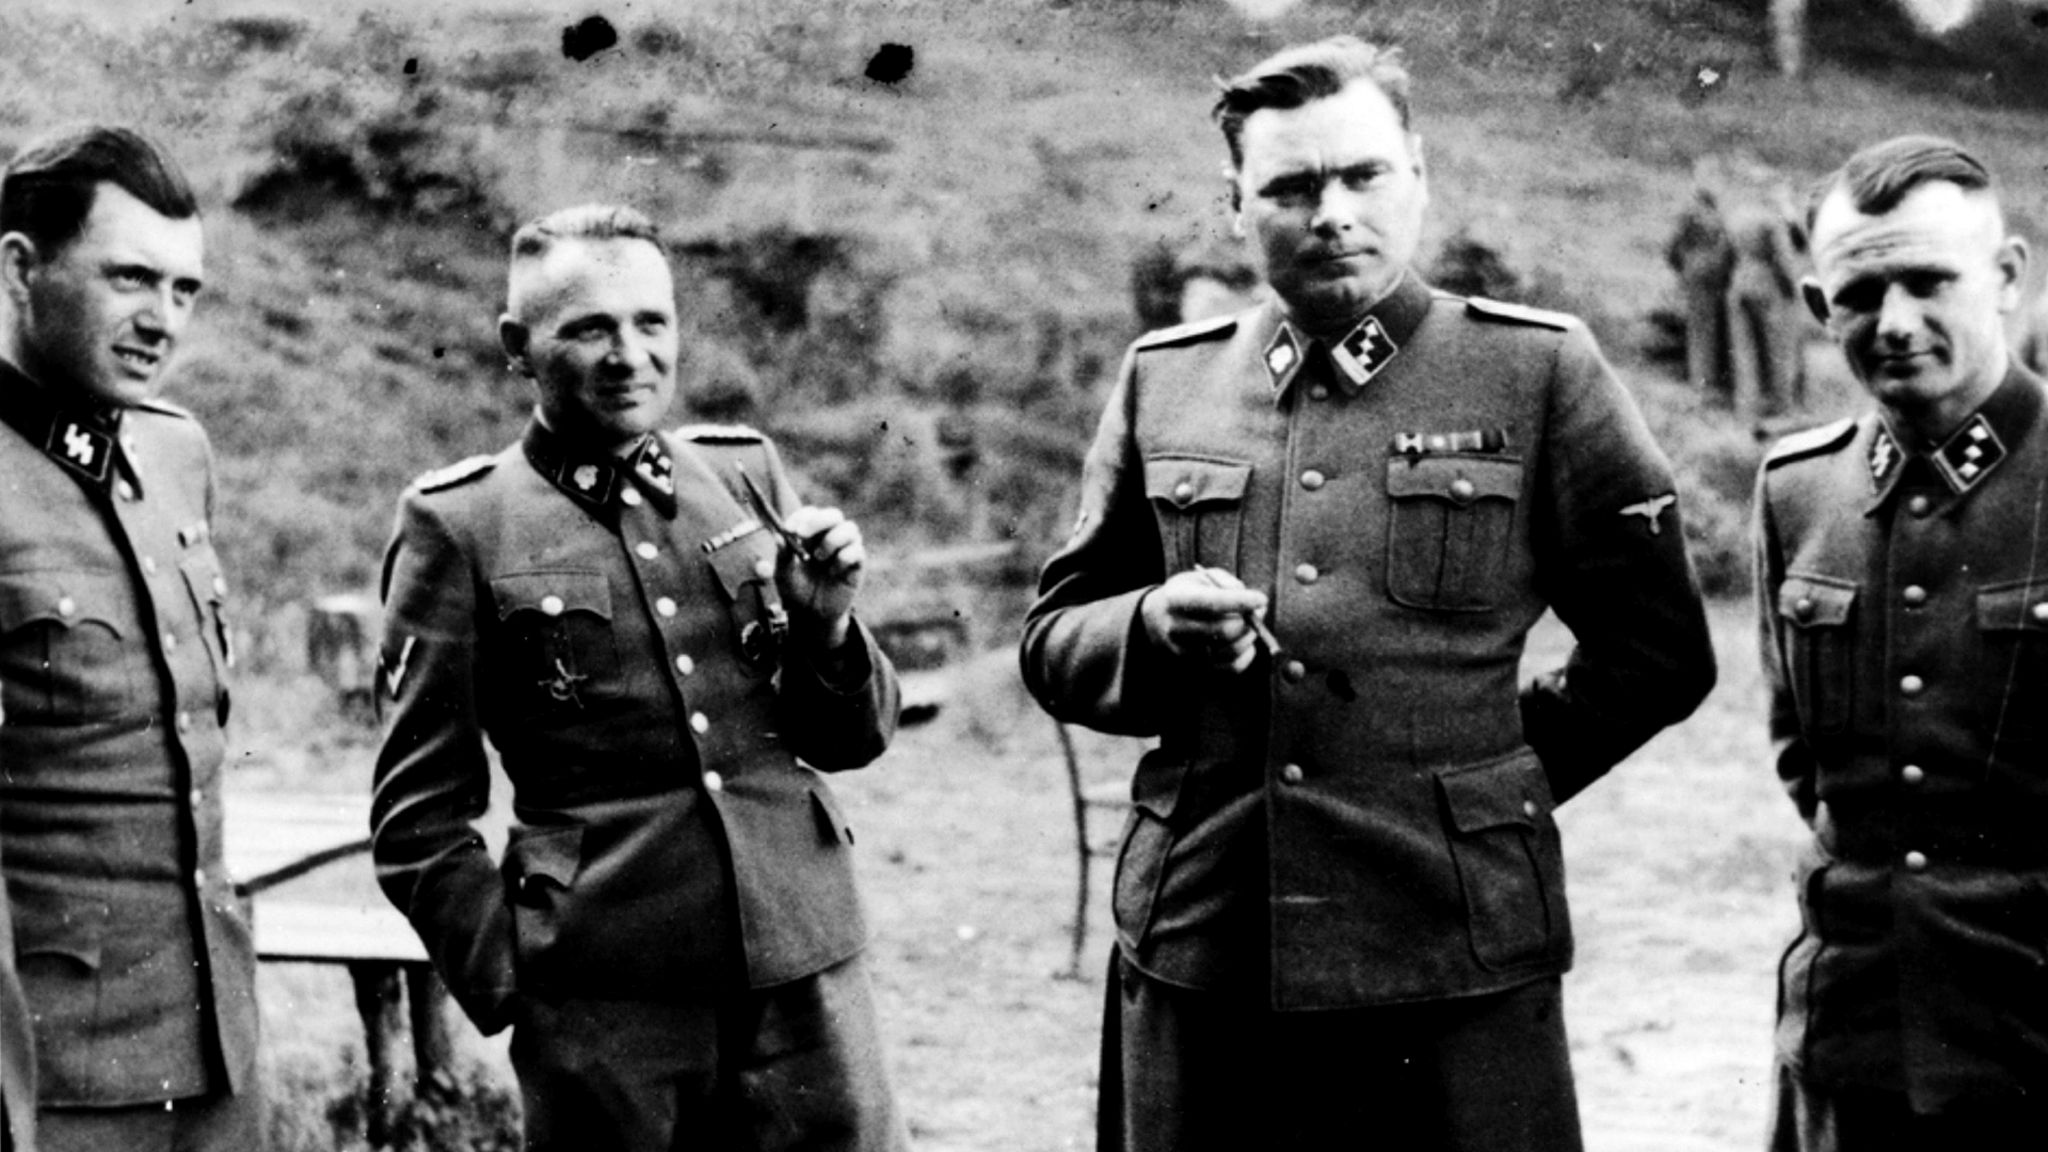 Josef Mengele pictured (left) with other senior Nazi officers